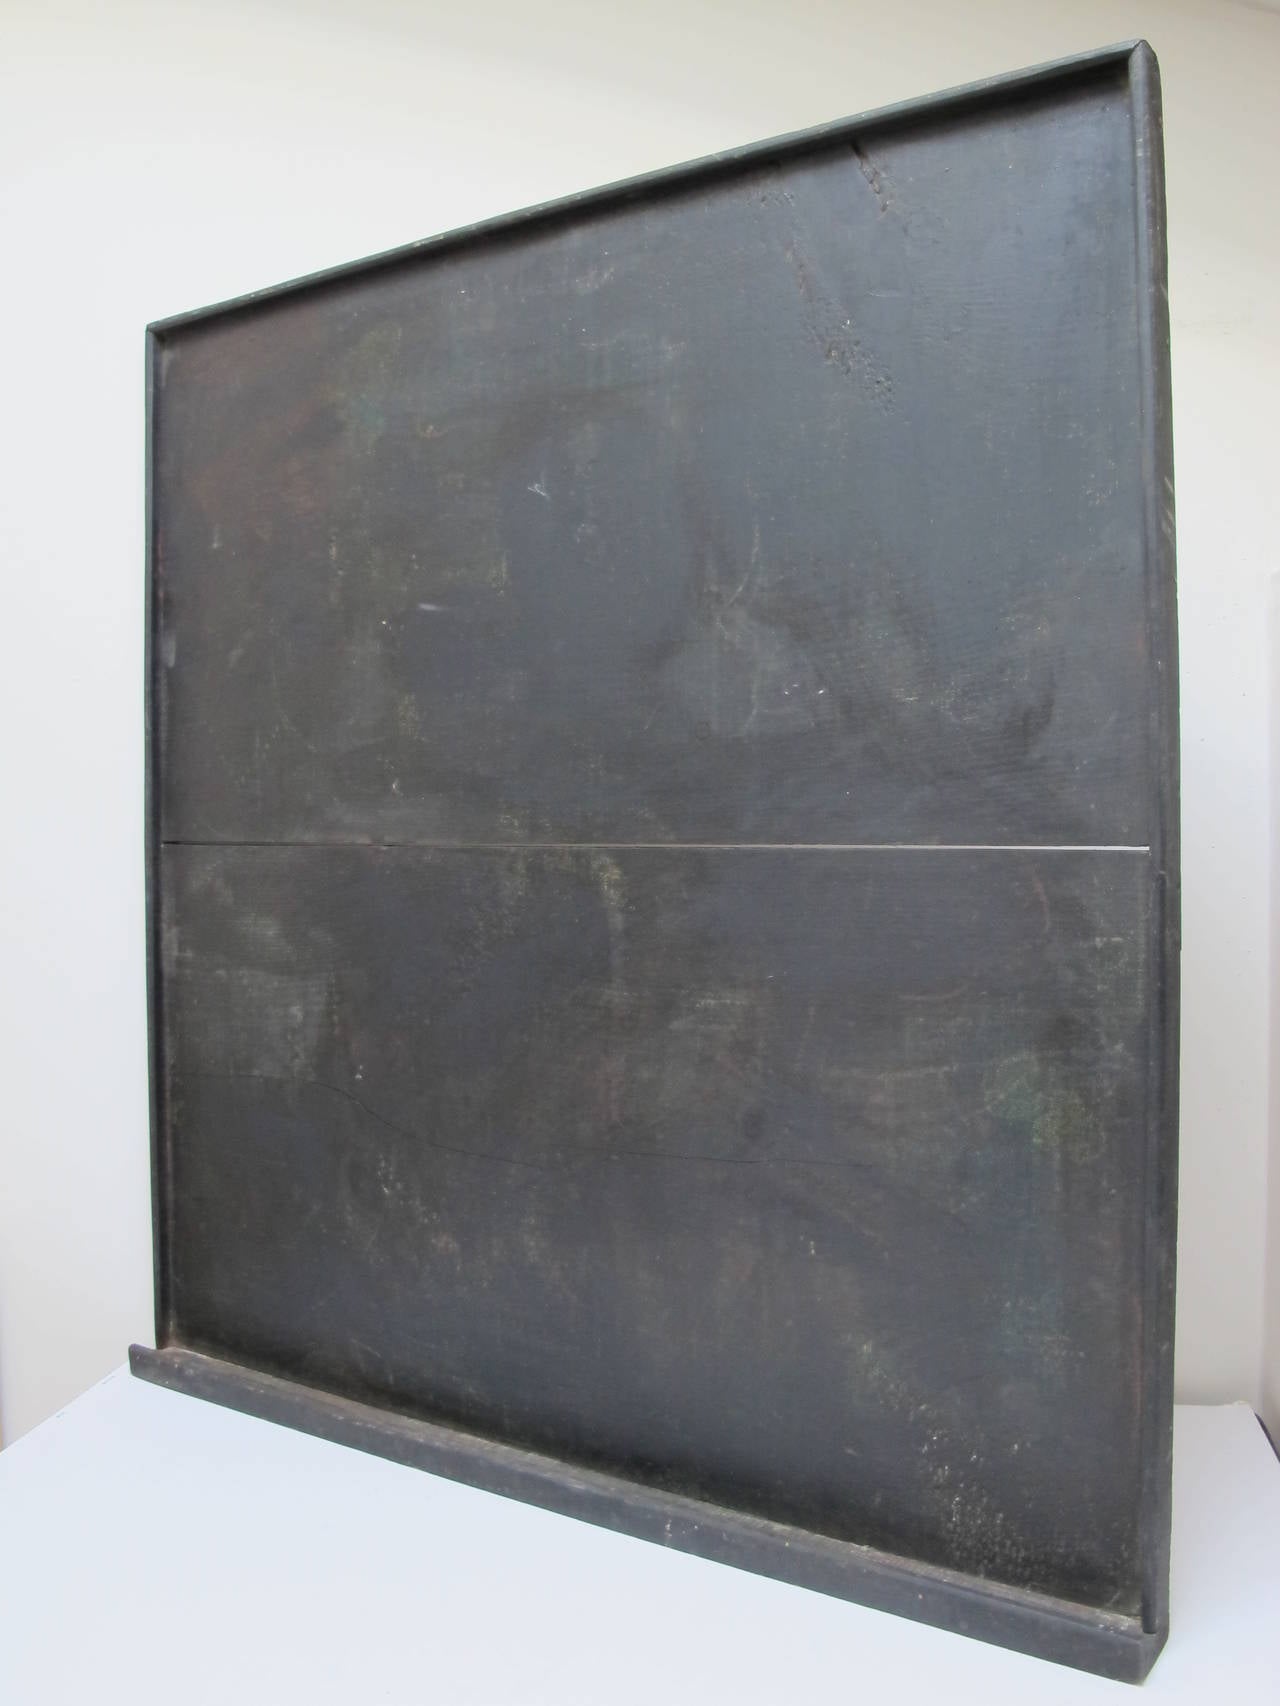 Well made wooden blackboard with bottom wood tray for chalk and erasers and  edge molding. The flat  black board has a slight dark greenish tone to the painted surface that consists of 2 wide boards.